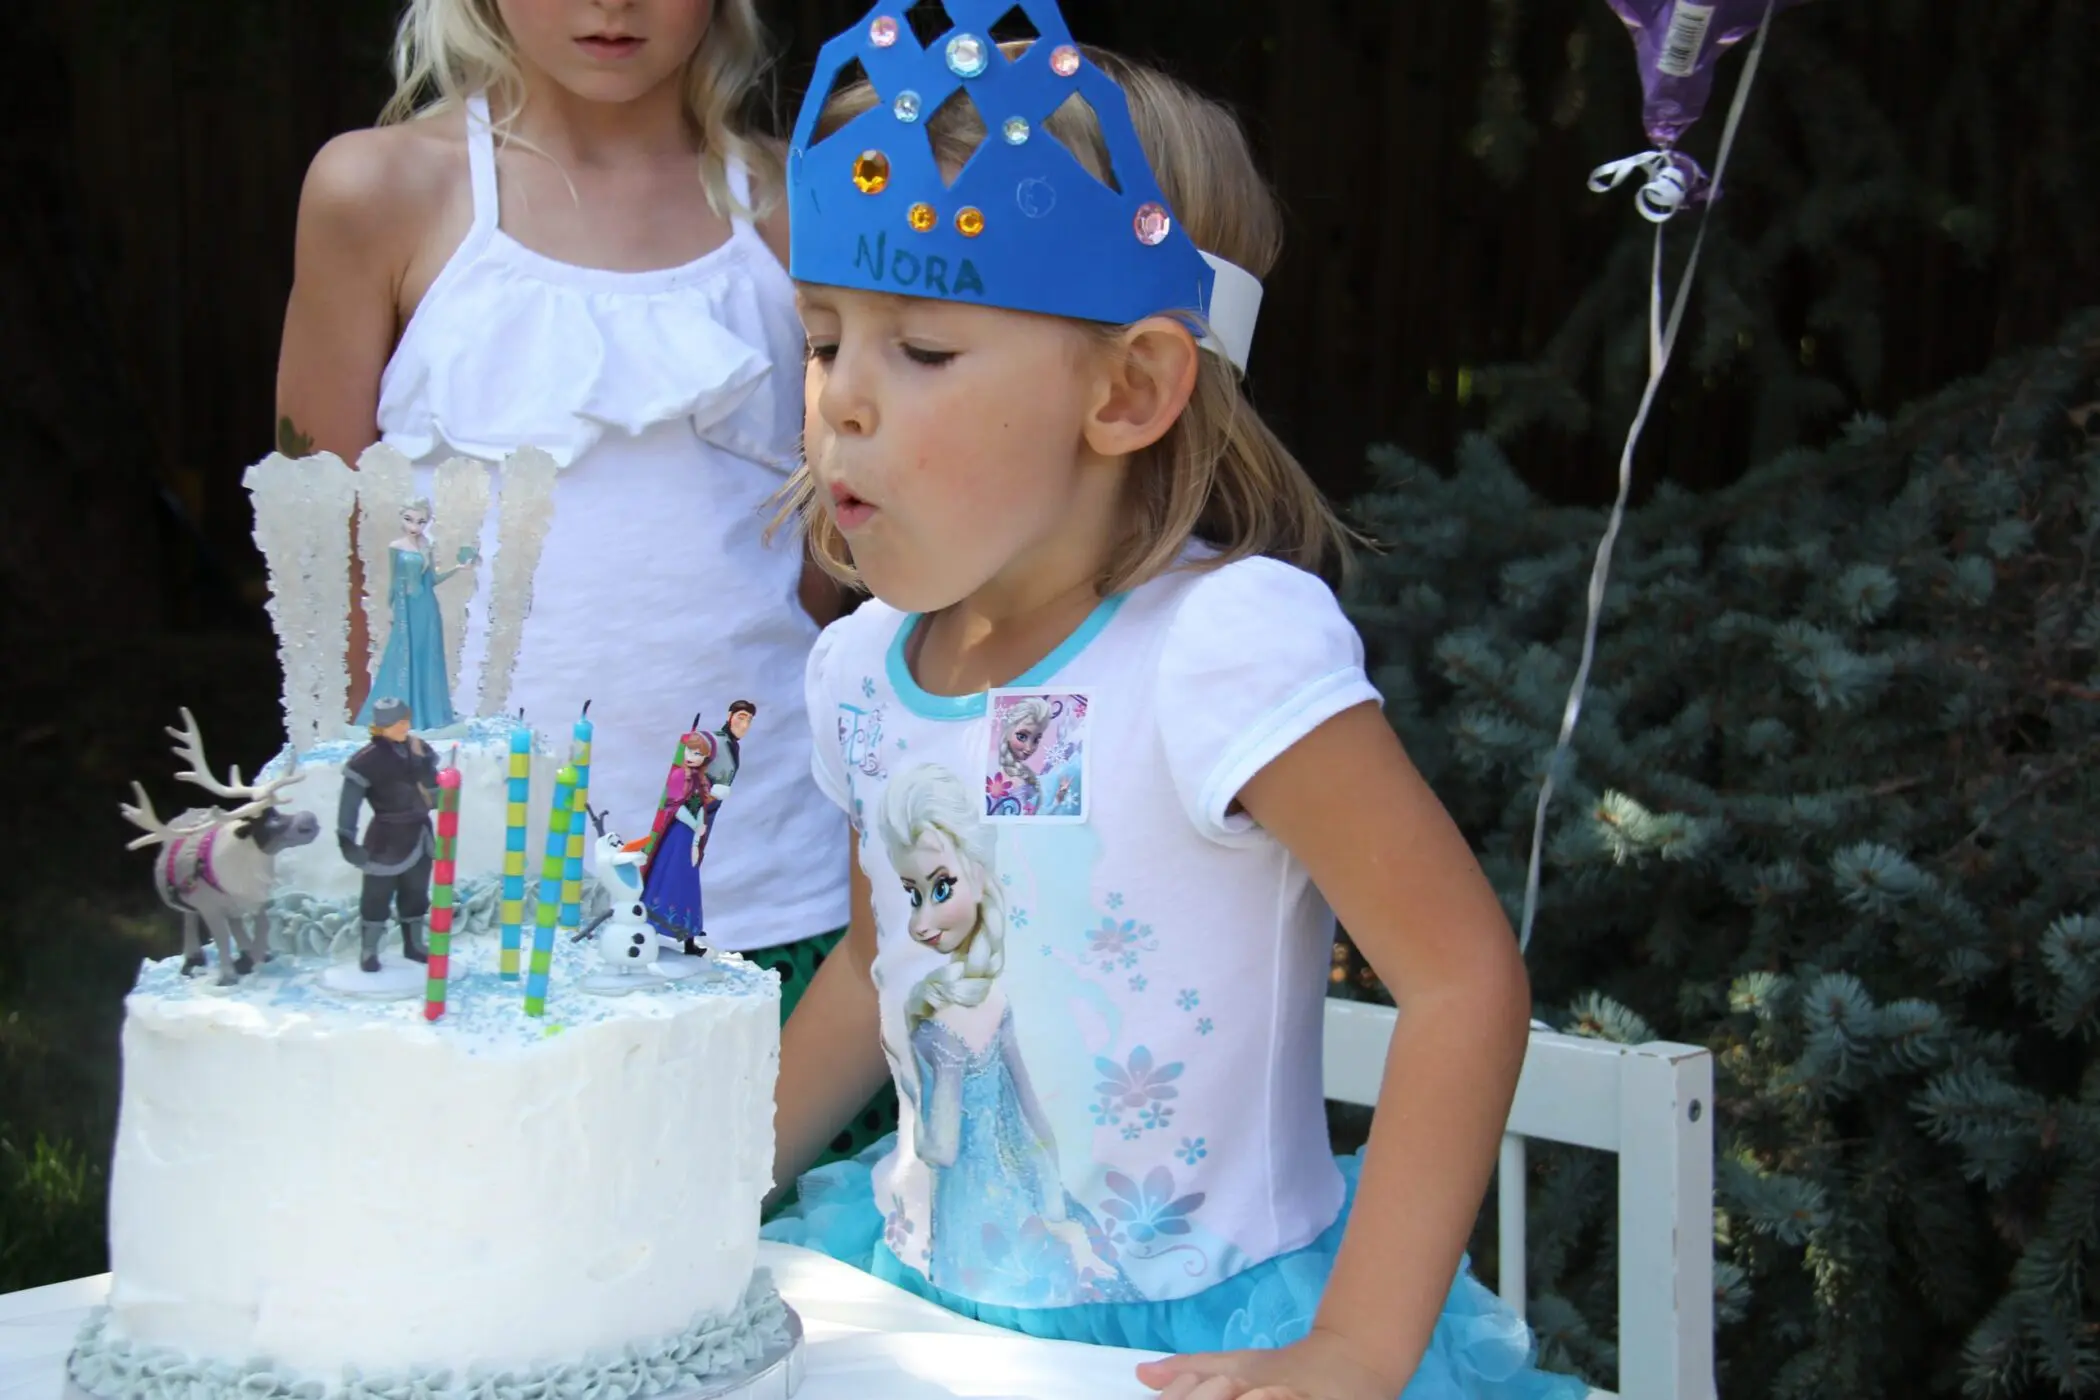 Nora blowing out candles on her Frozen cake